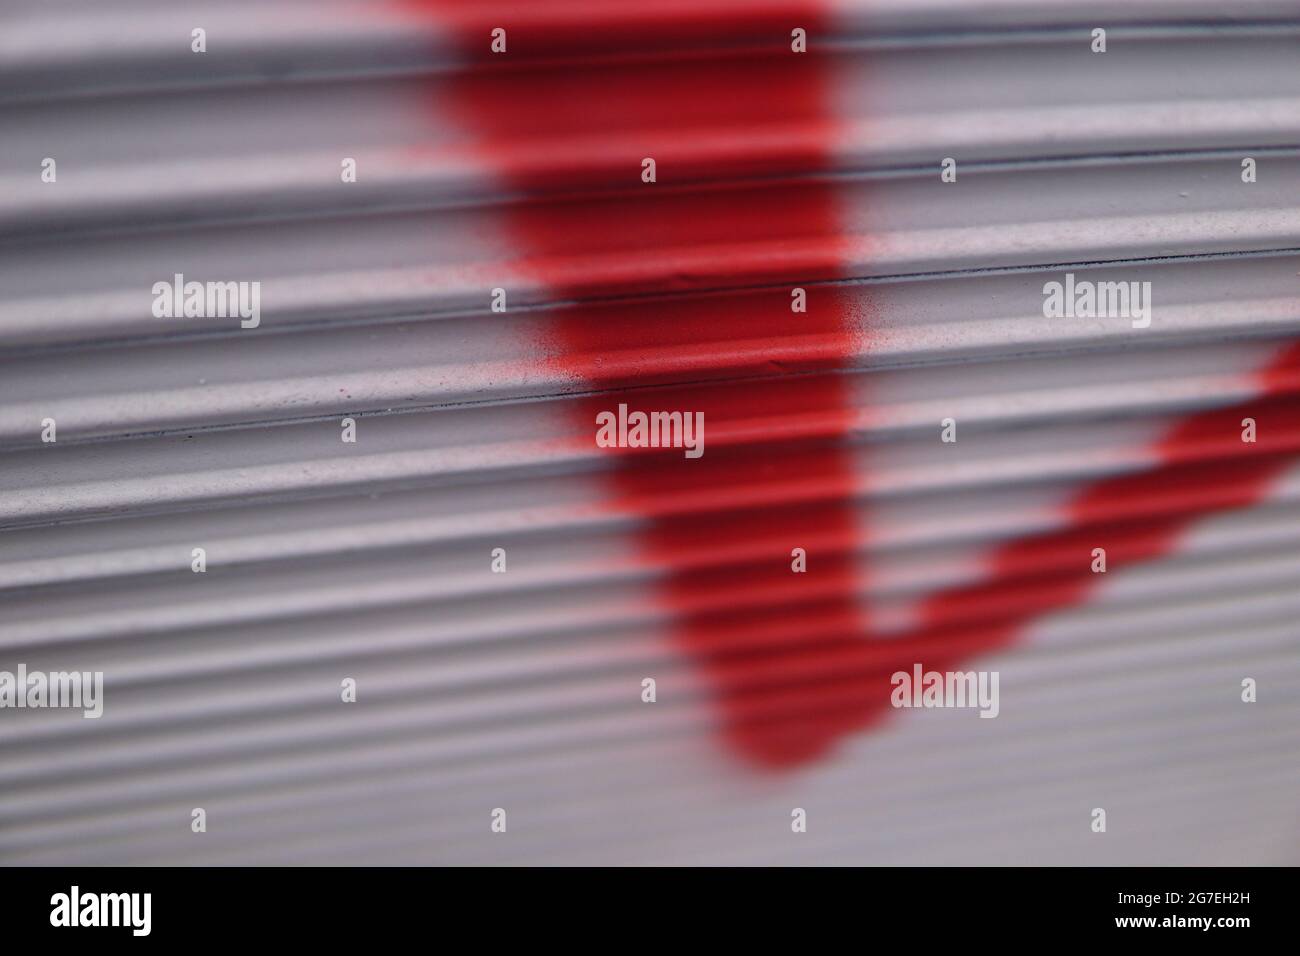 Closeup shot of an abstract white and red graffiti on a folding metal gate outdoors Stock Photo